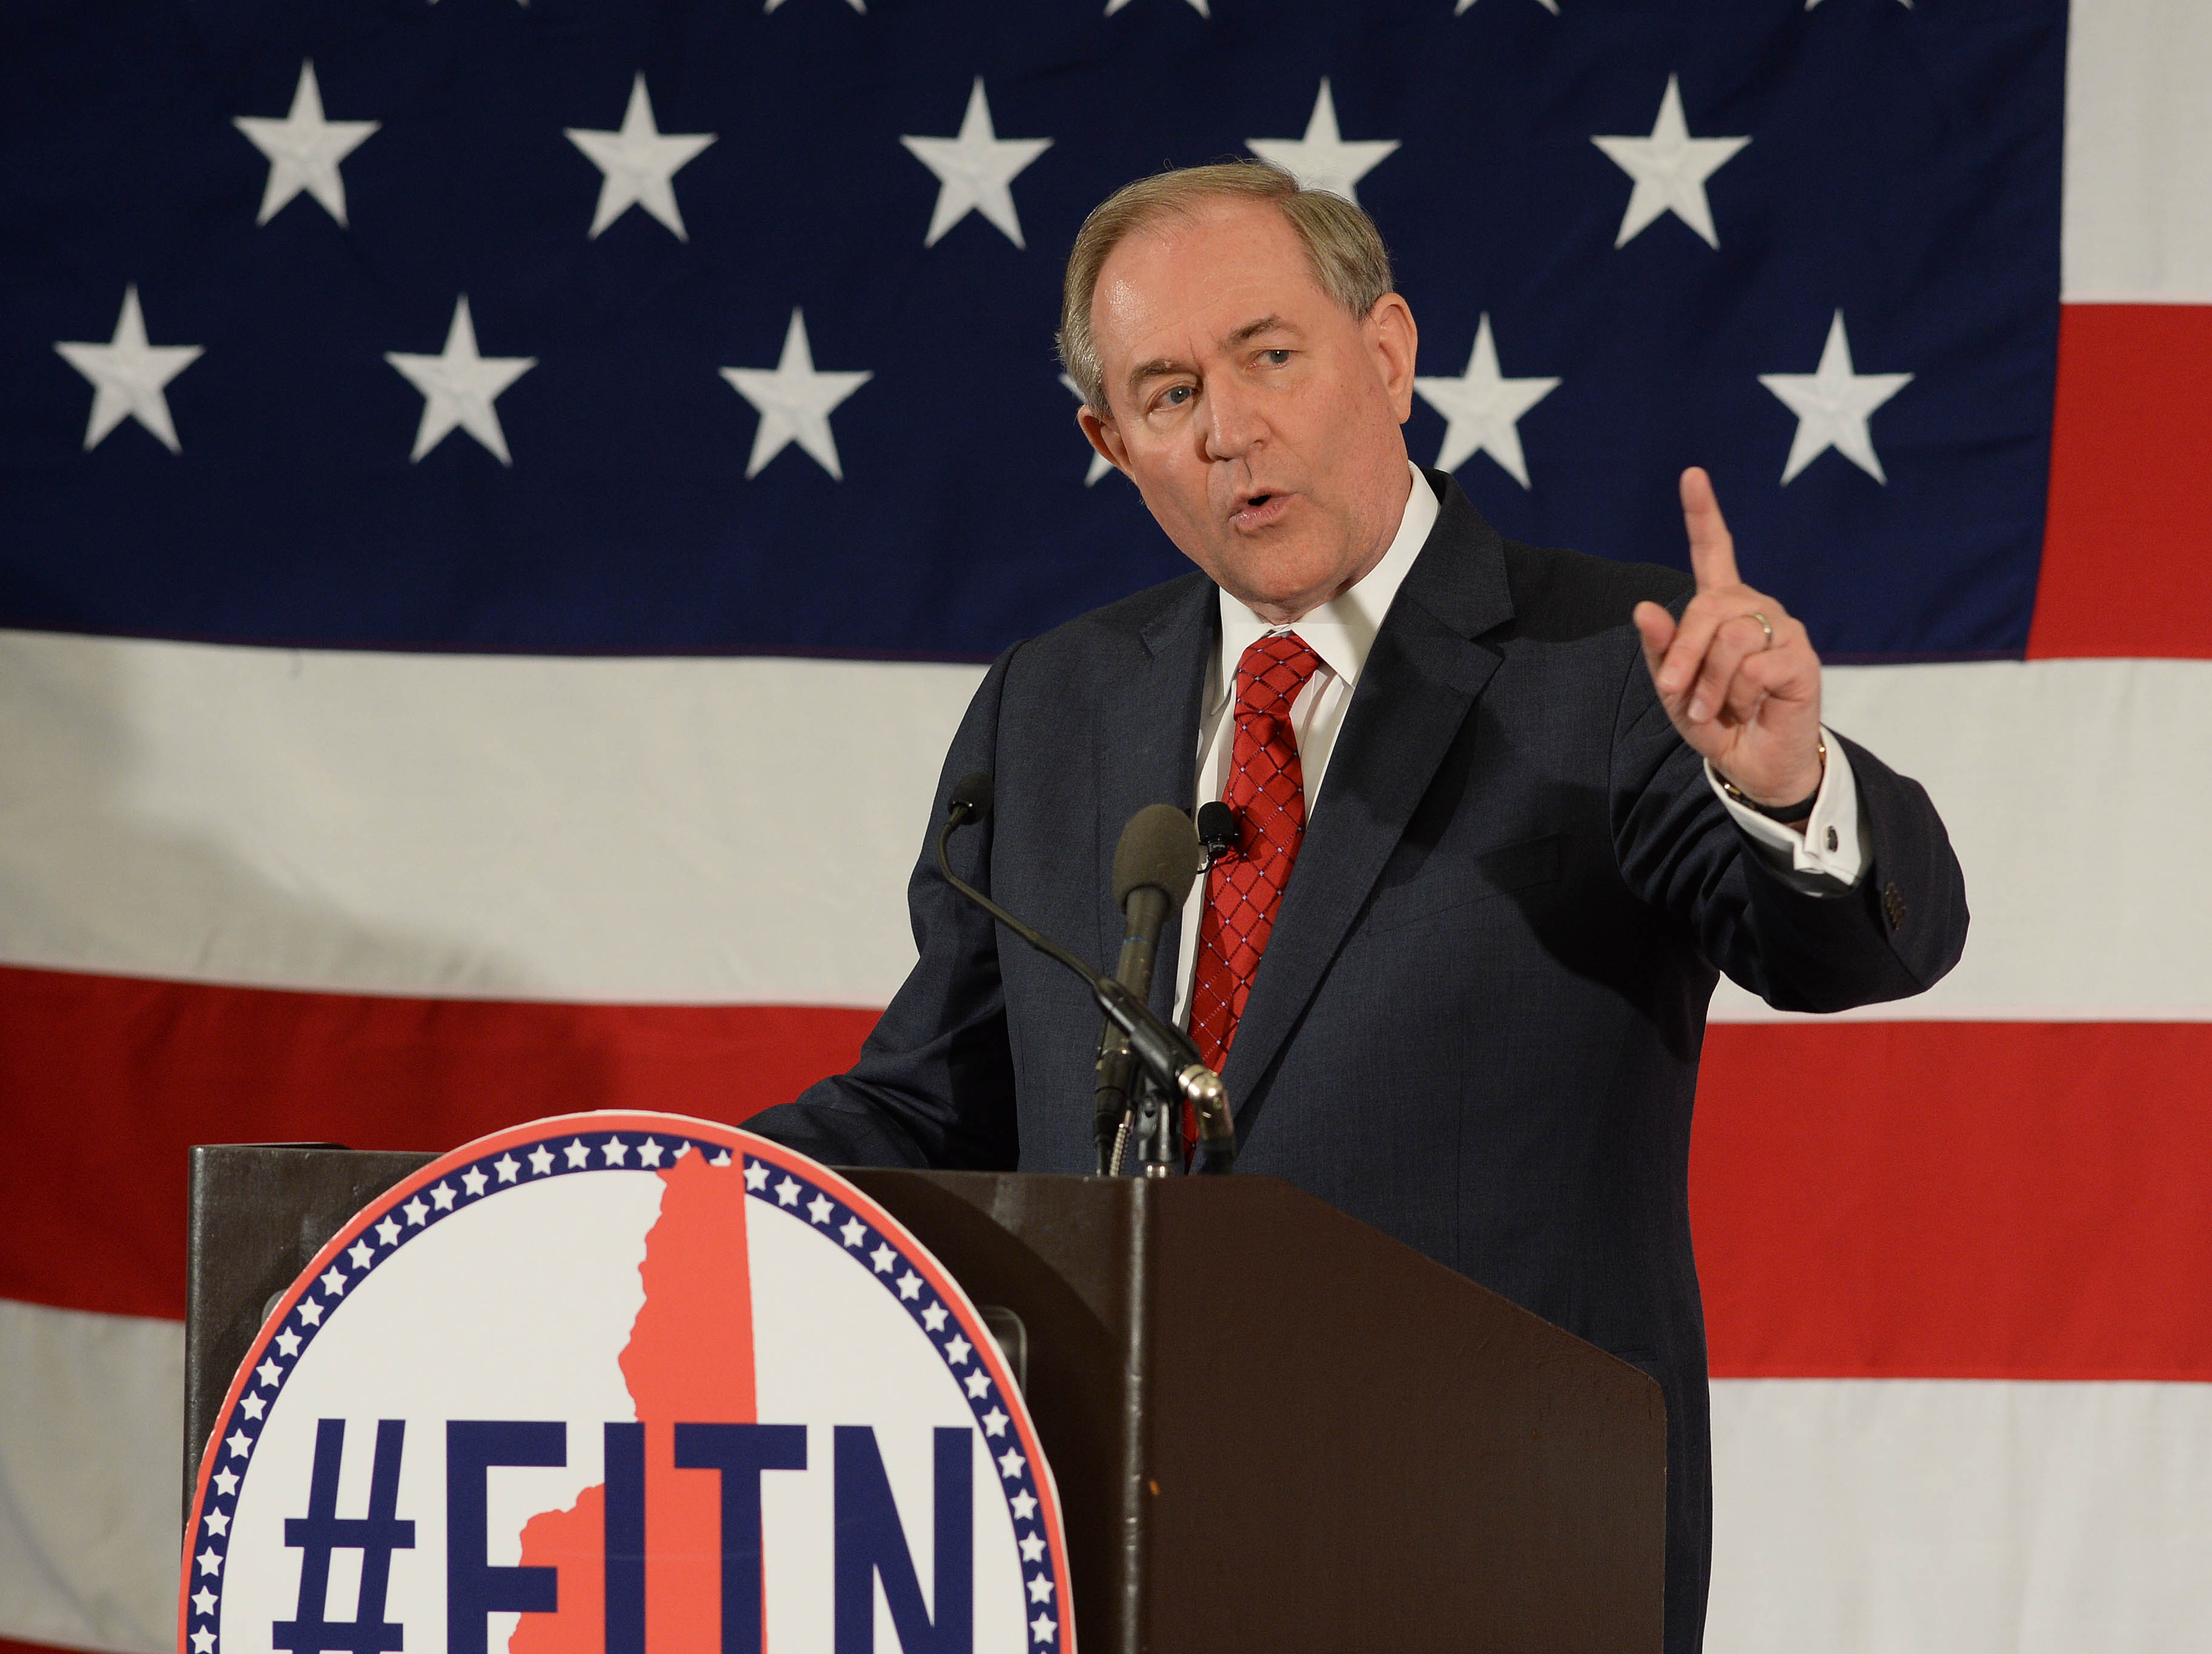 Former Virginia Gov. Jim Gilmore speaks at the First in the Nation Republican Leadership Summit on April 17, 2015, in Nashua, N.H. (Darren McCollester—Getty Images)